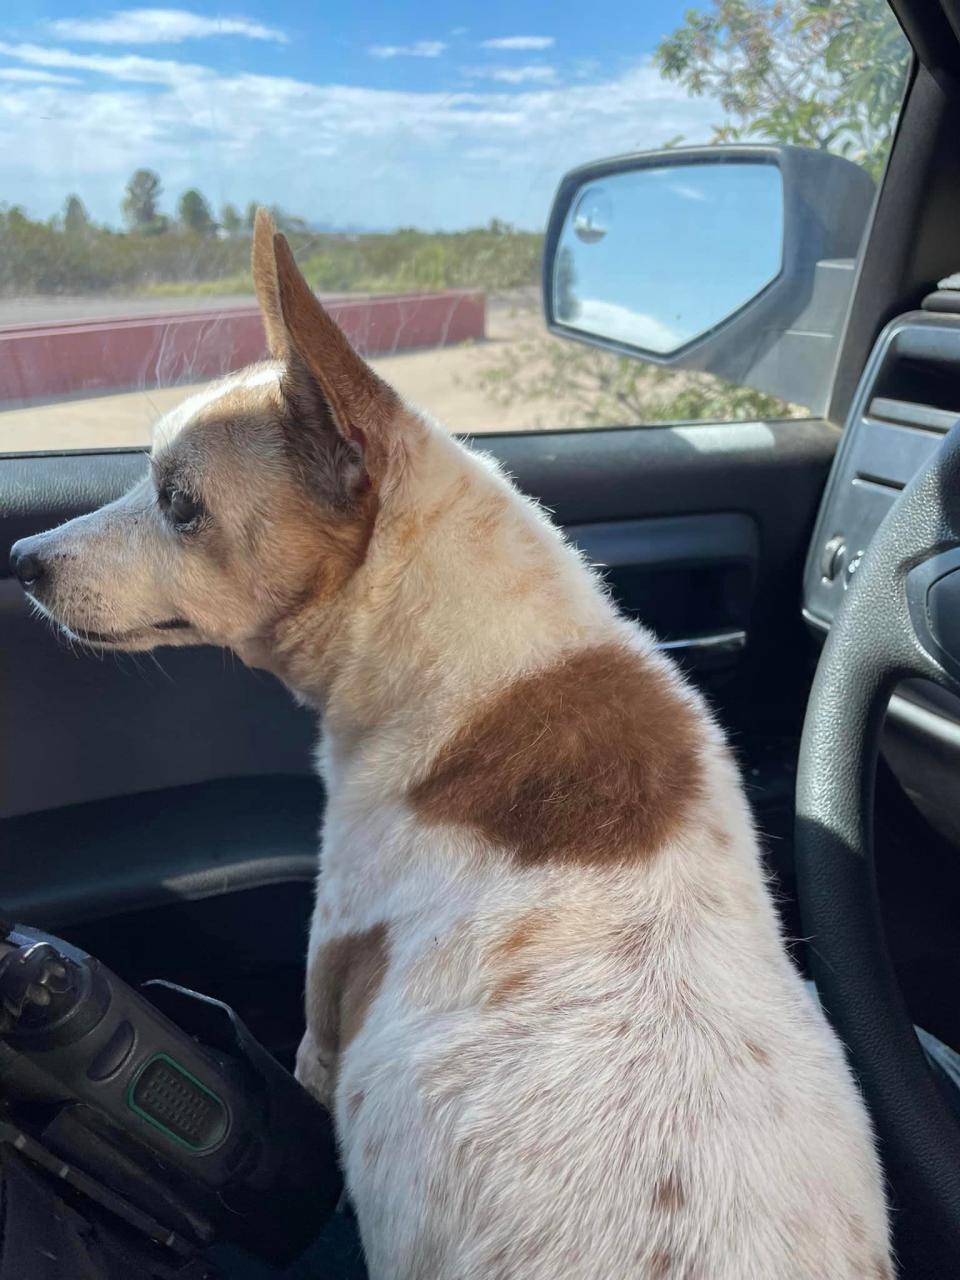 Henry, an elderly, visually impaired dog, who was abandoned by his owner at a roadside in Benson, Arizona.